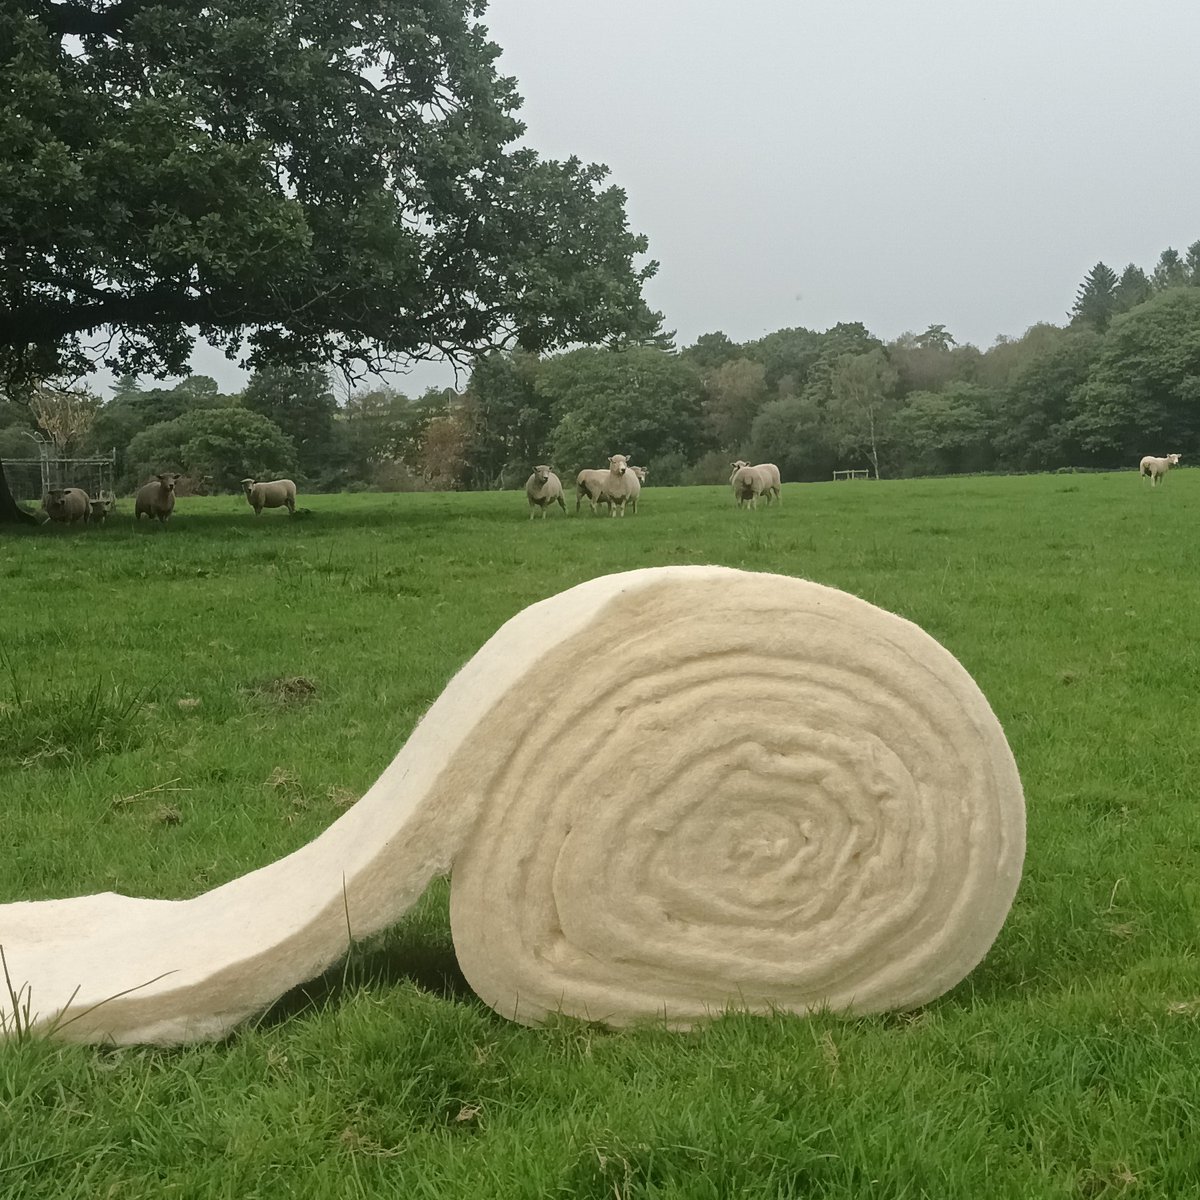 Meet Wool Insulation Wales, the dedicated duo, Mair and Ruth-Marie, behind TrueWool.
bit.ly/446GszF

#Insulation crafted from 100% #Traceable #WelshWool

Read more about how #TrueWool came about and the wool used in this product
#BritishWool #Wool